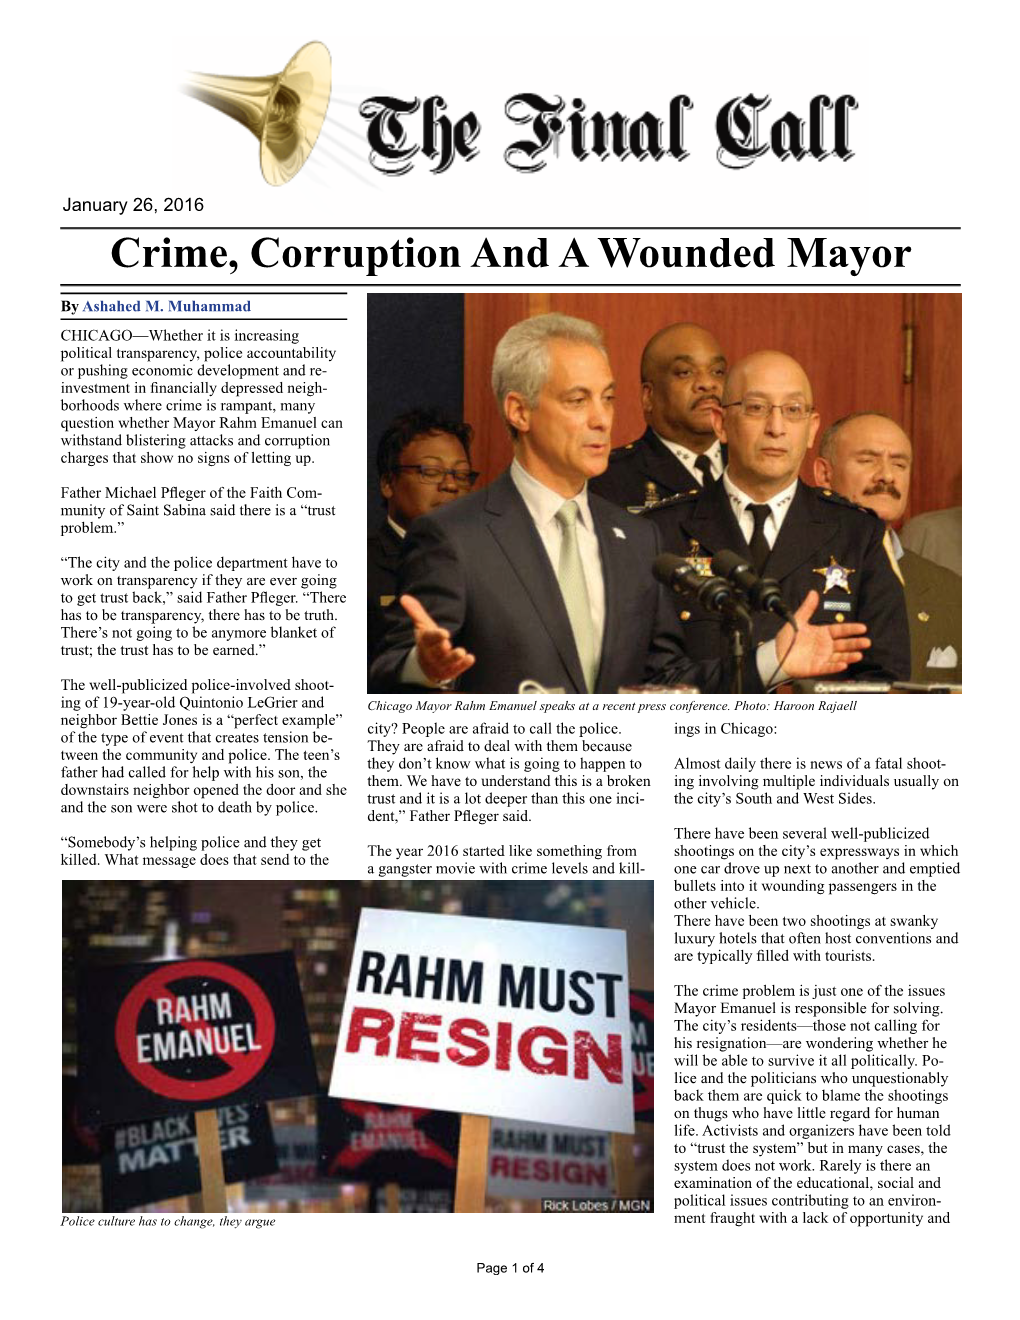 Crime, Corruption and a Wounded Mayor